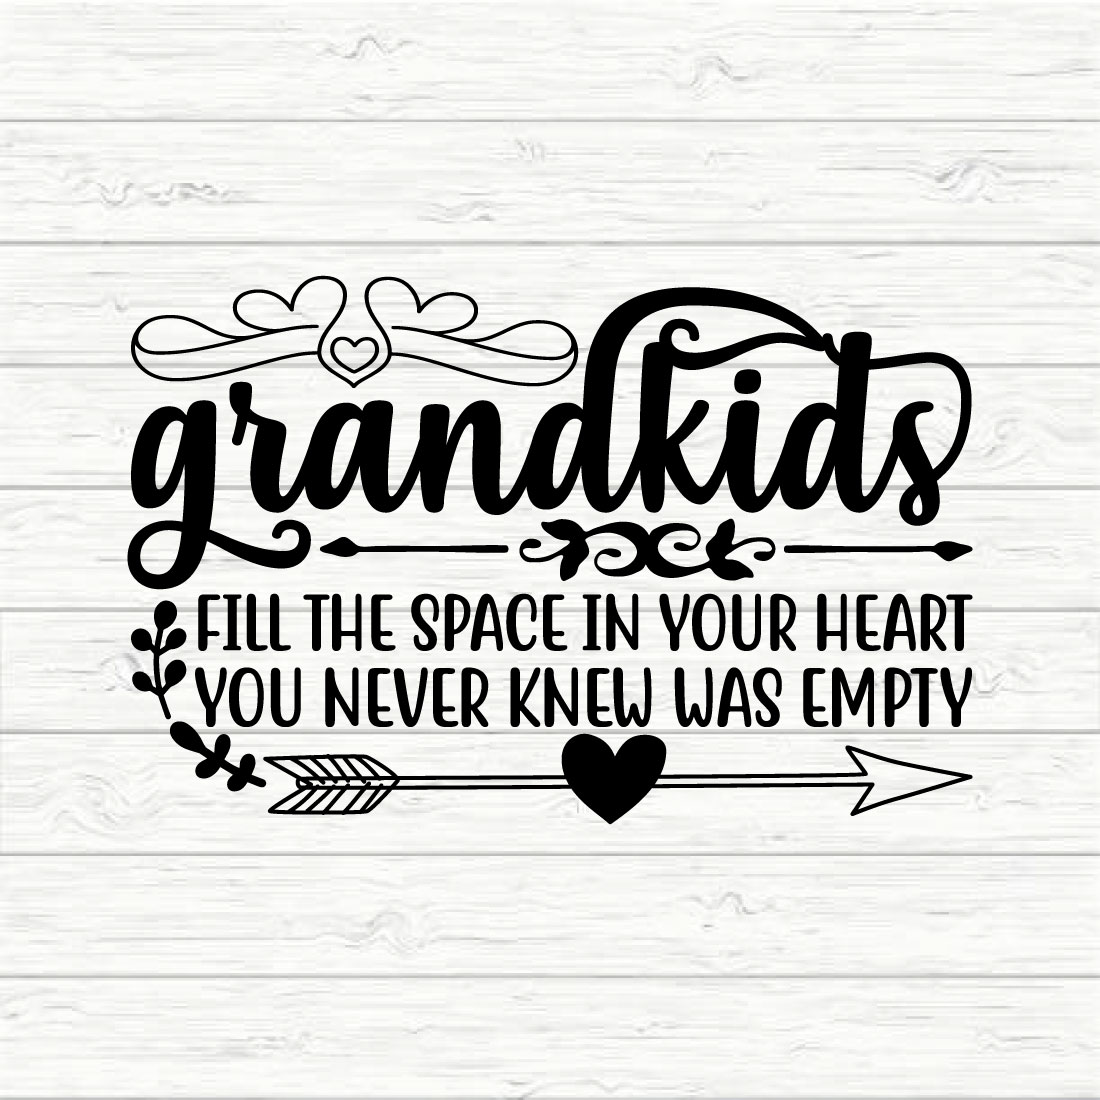 Grandkids Fill The Space In Your Heart You Never Knew Was Empty preview image.